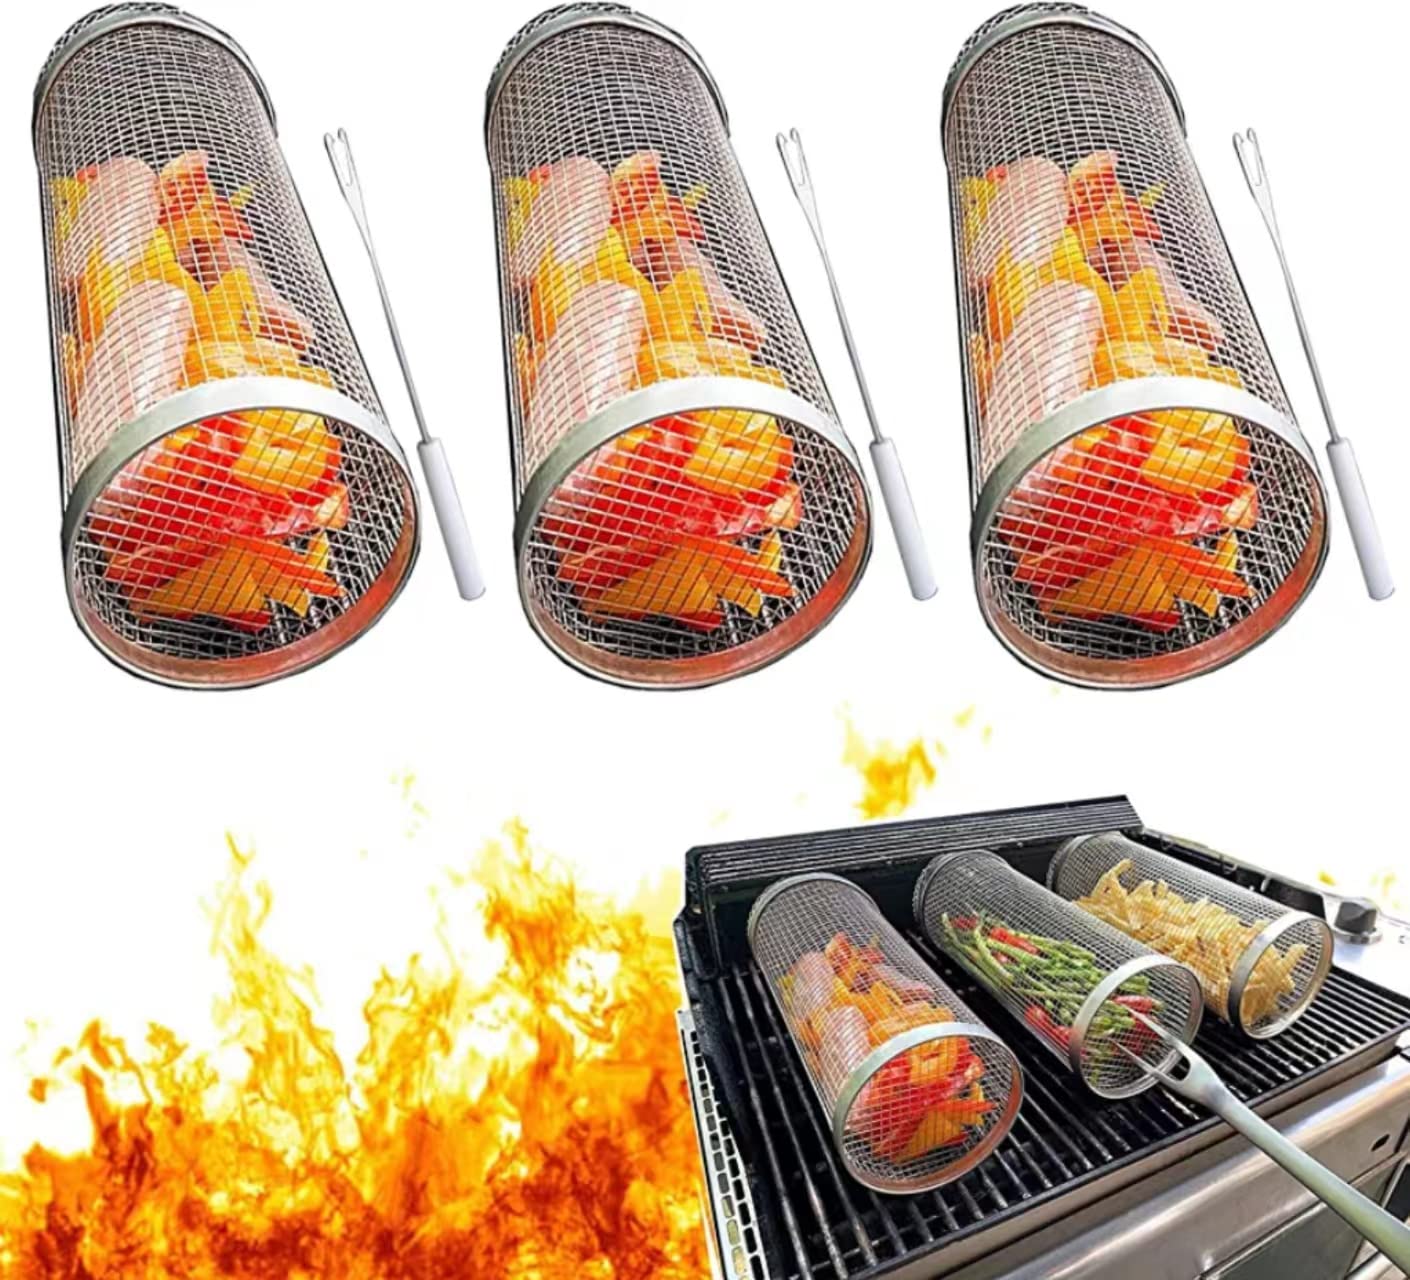 Rolling Grilling Basket BBQ Net Tube Round Stainless Steel BBQ Grill Mesh Cylinder Camping Barbecue Rack for Vegetables Fries Mary's Mercantile Shoppe